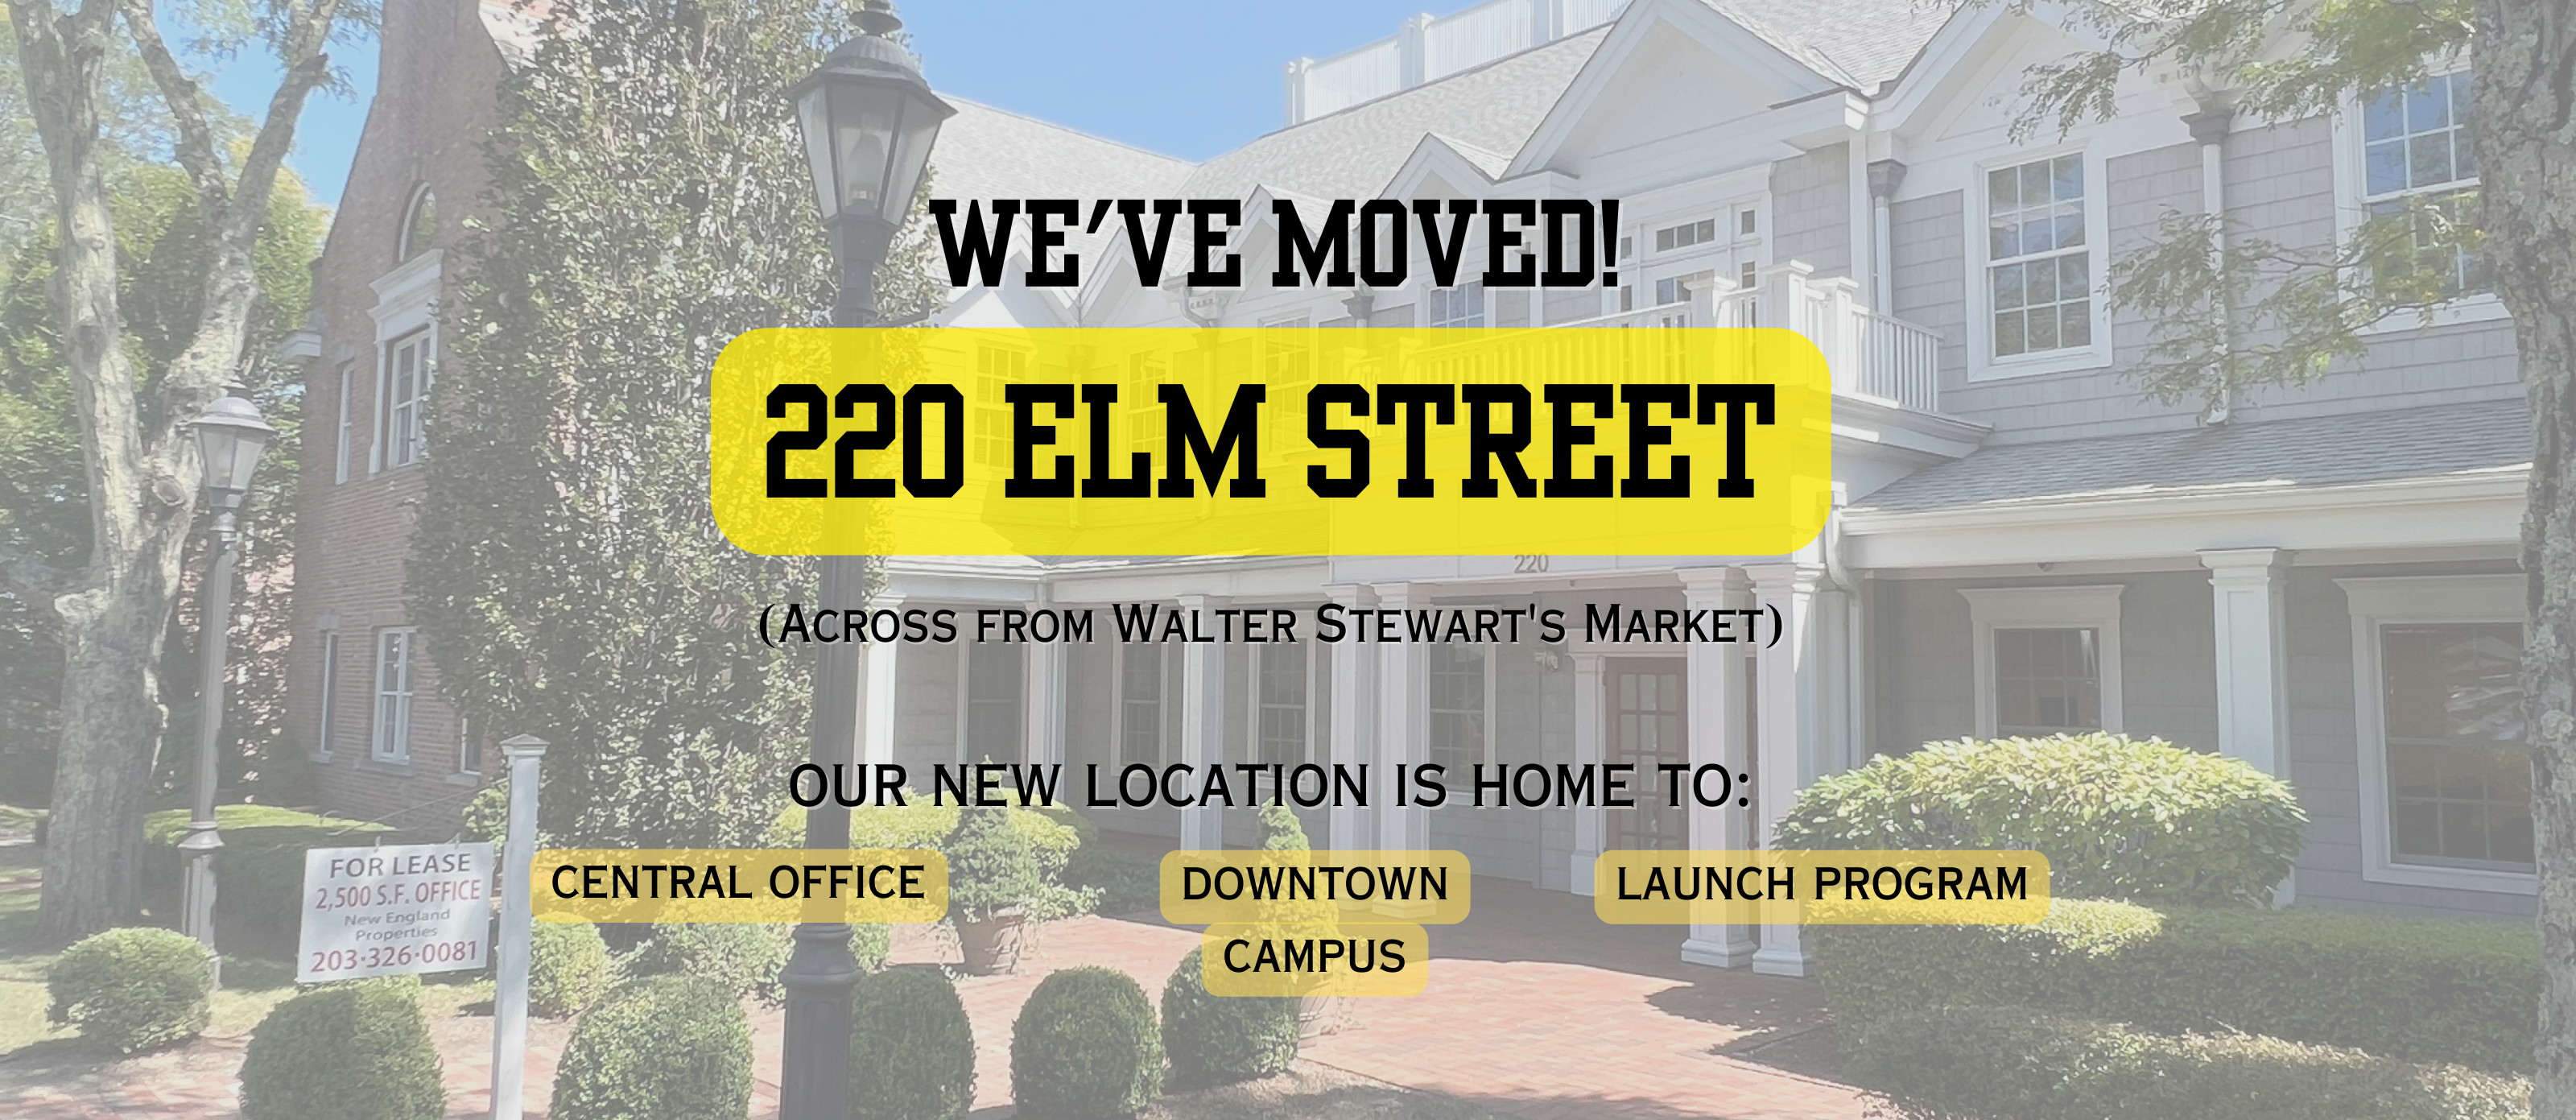 We've Moved! Our central office, launch program and downtown campus can now be found at 220 Elm Street